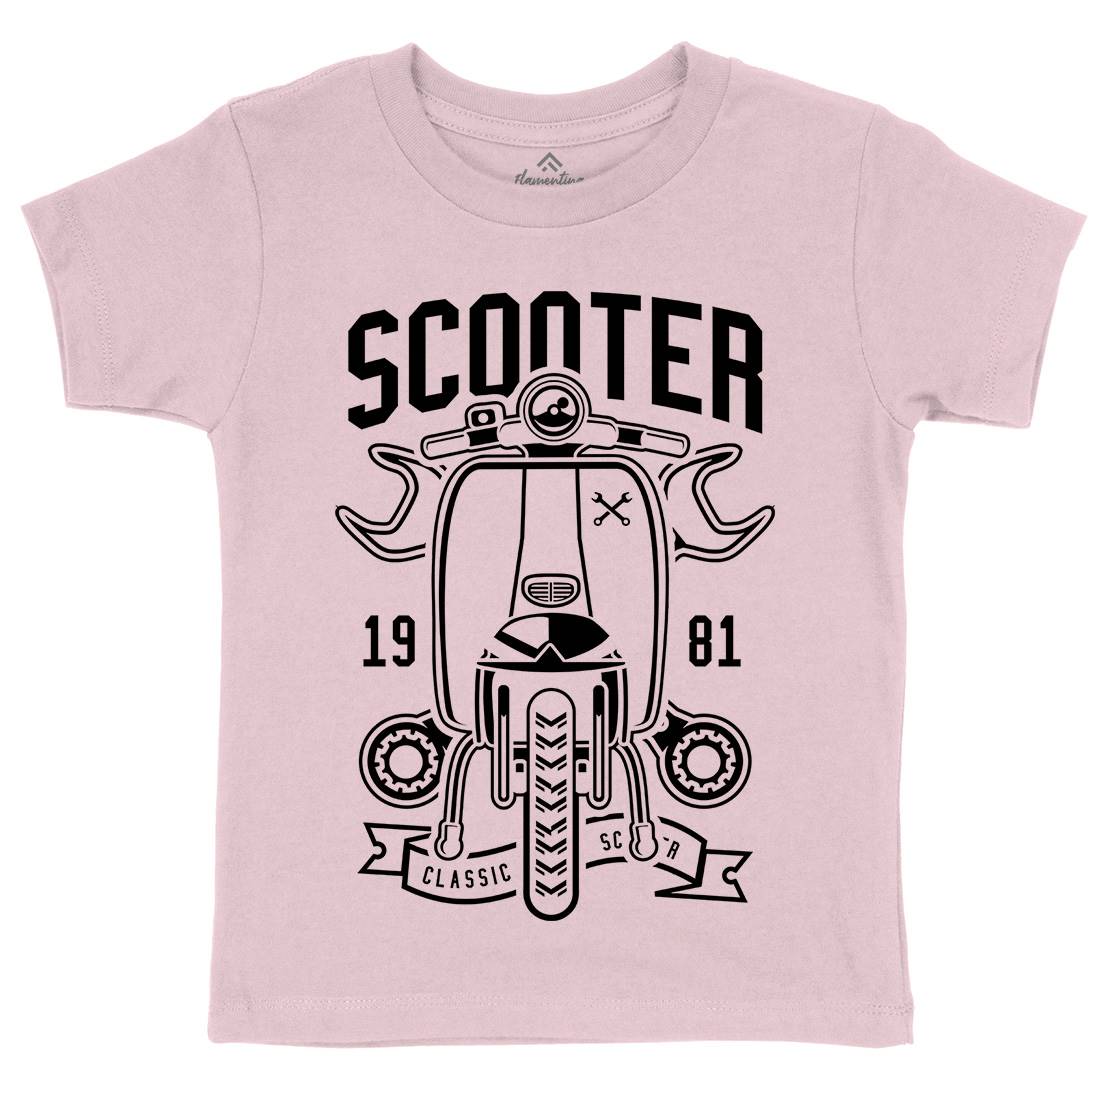 Scooter Classic Kids Crew Neck T-Shirt Motorcycles B618